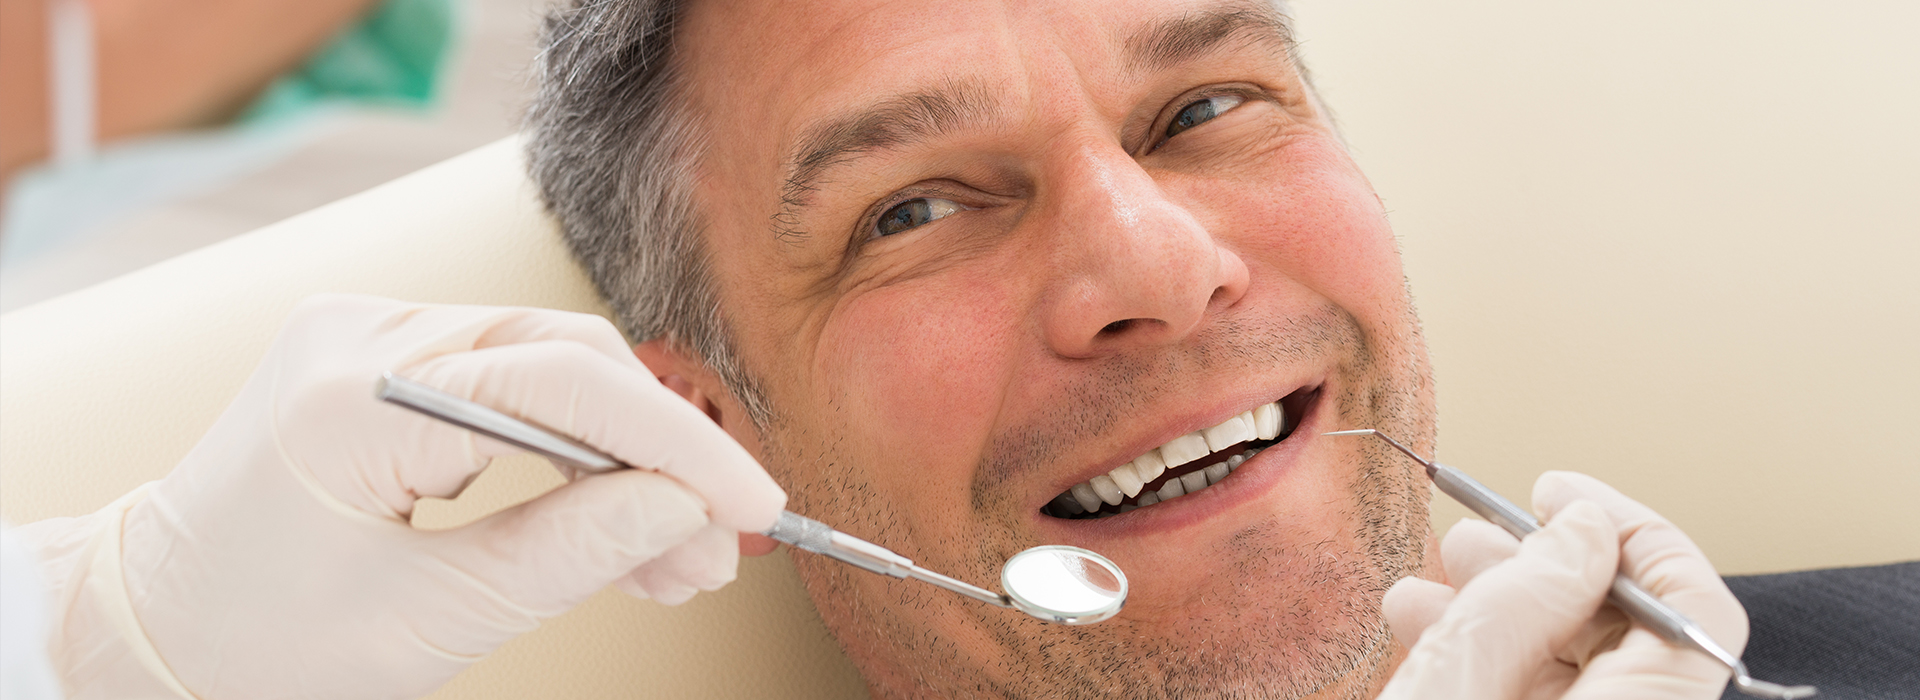 Mann Dental Care | Snoring Appliances, Cosmetic Dentistry and Root Canals